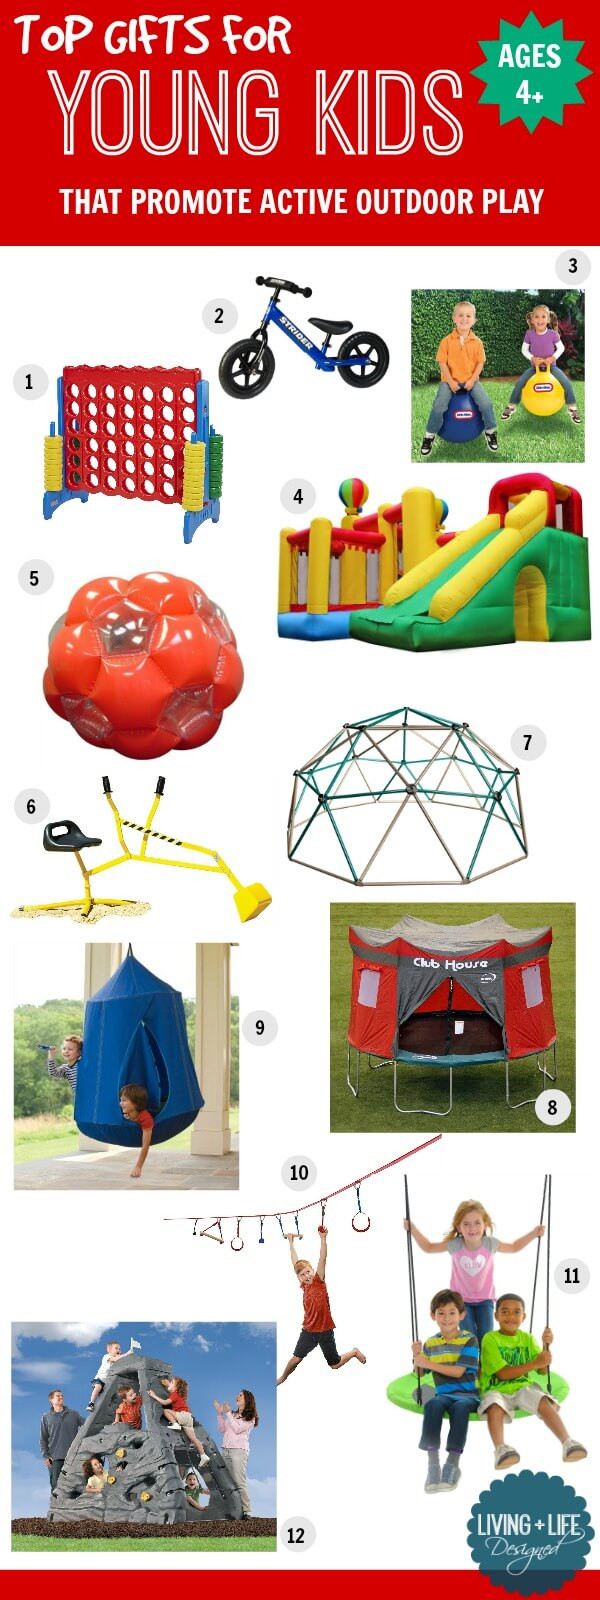 Outdoor Stuff For Kids
 Gift Ideas for Young Kids Ages 4 That Promote Active